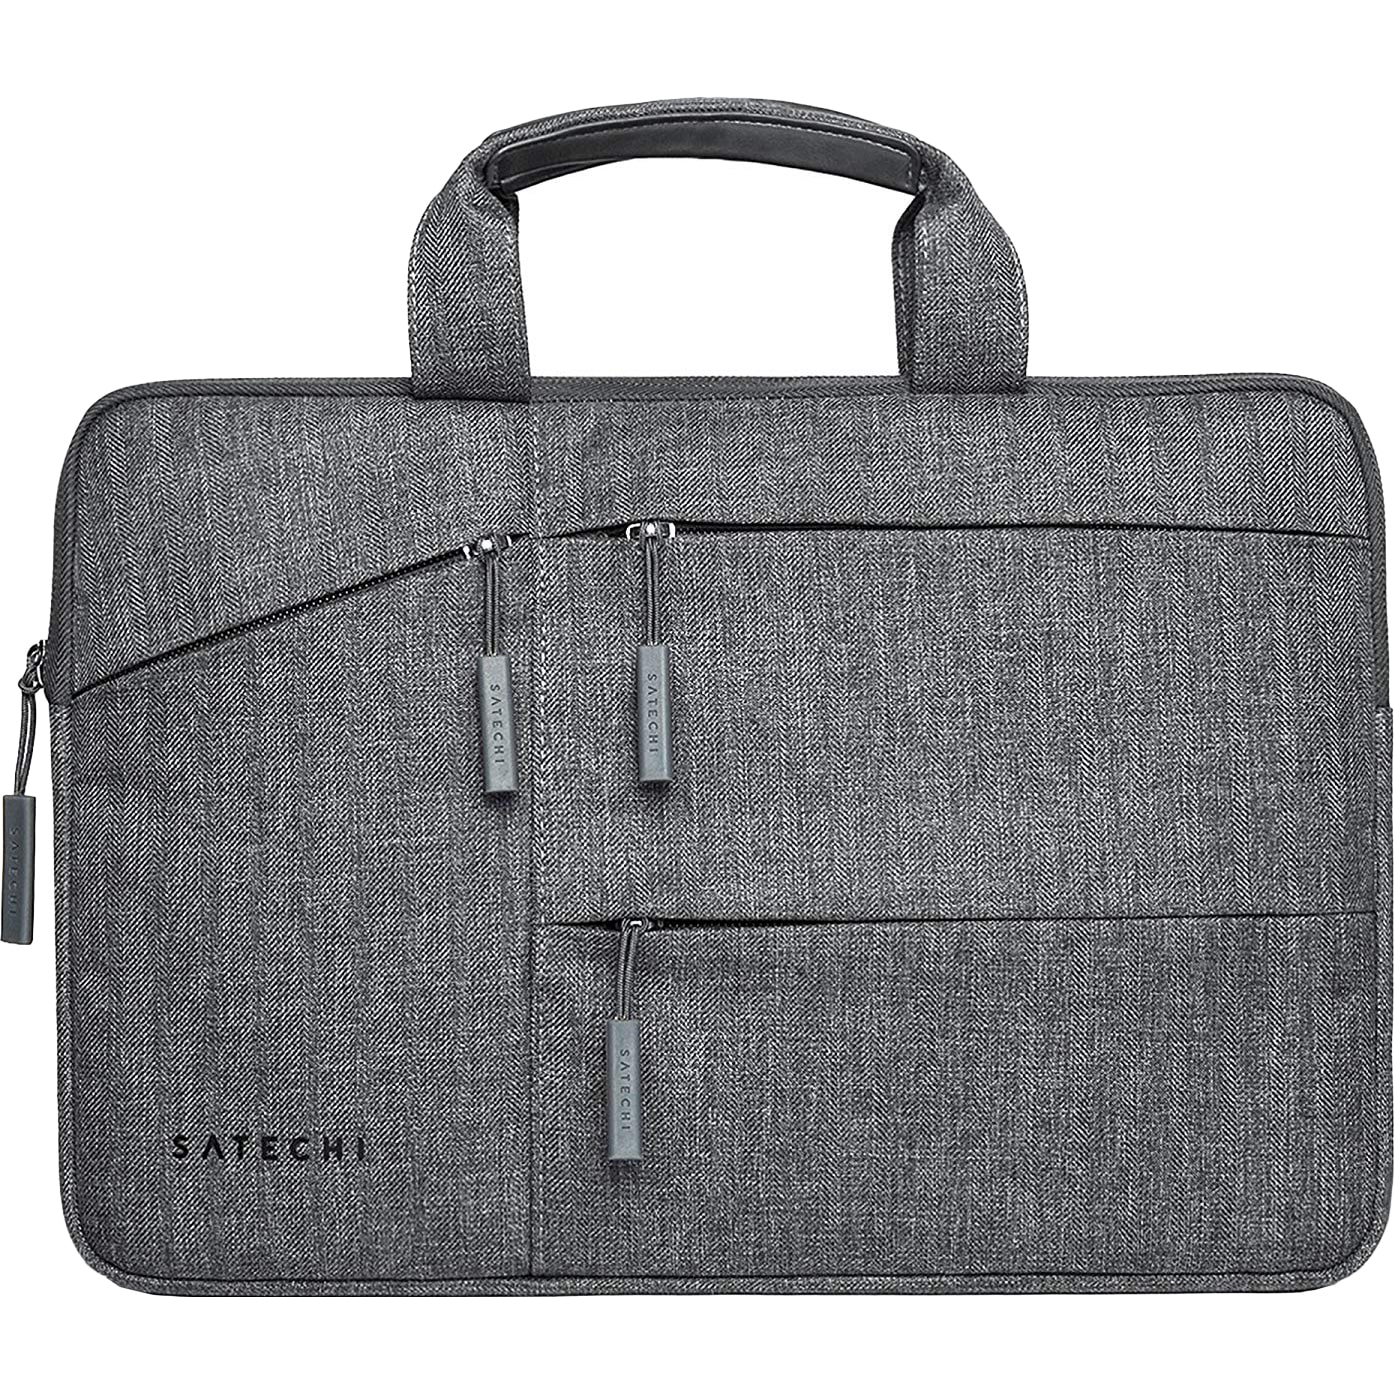 цена Сумка Satechi Water-Resistant Laptop Carrying Case ST-LTB15